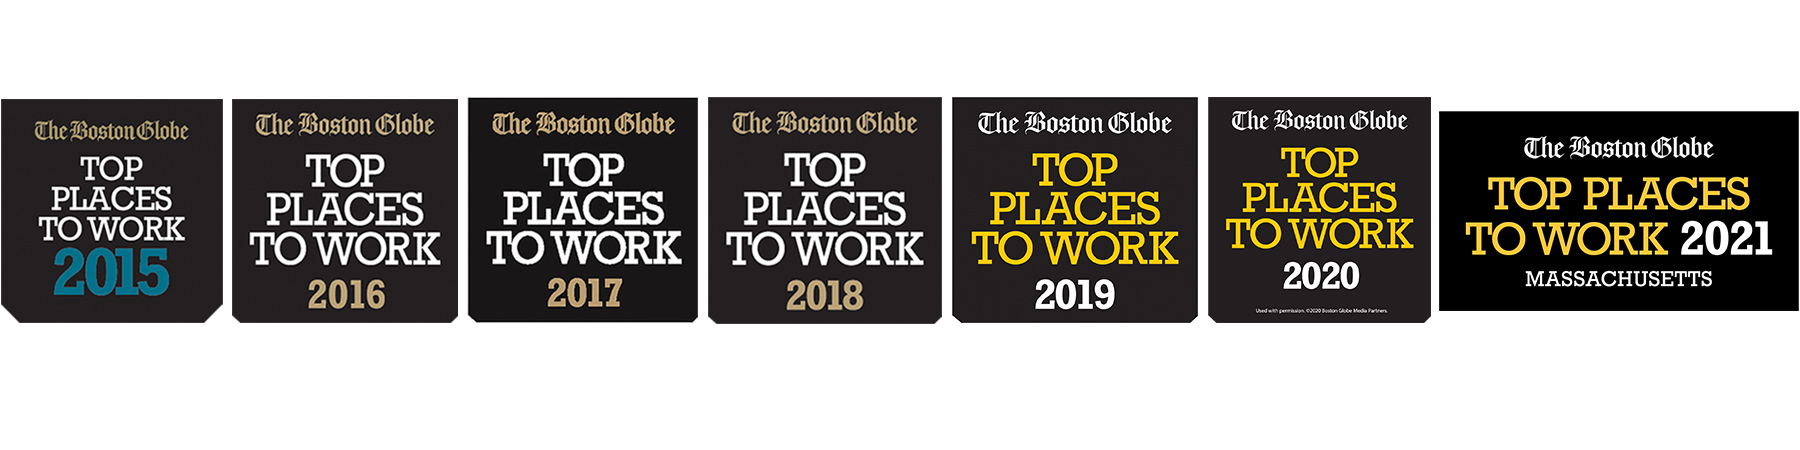 Top Places to Work for 7 years